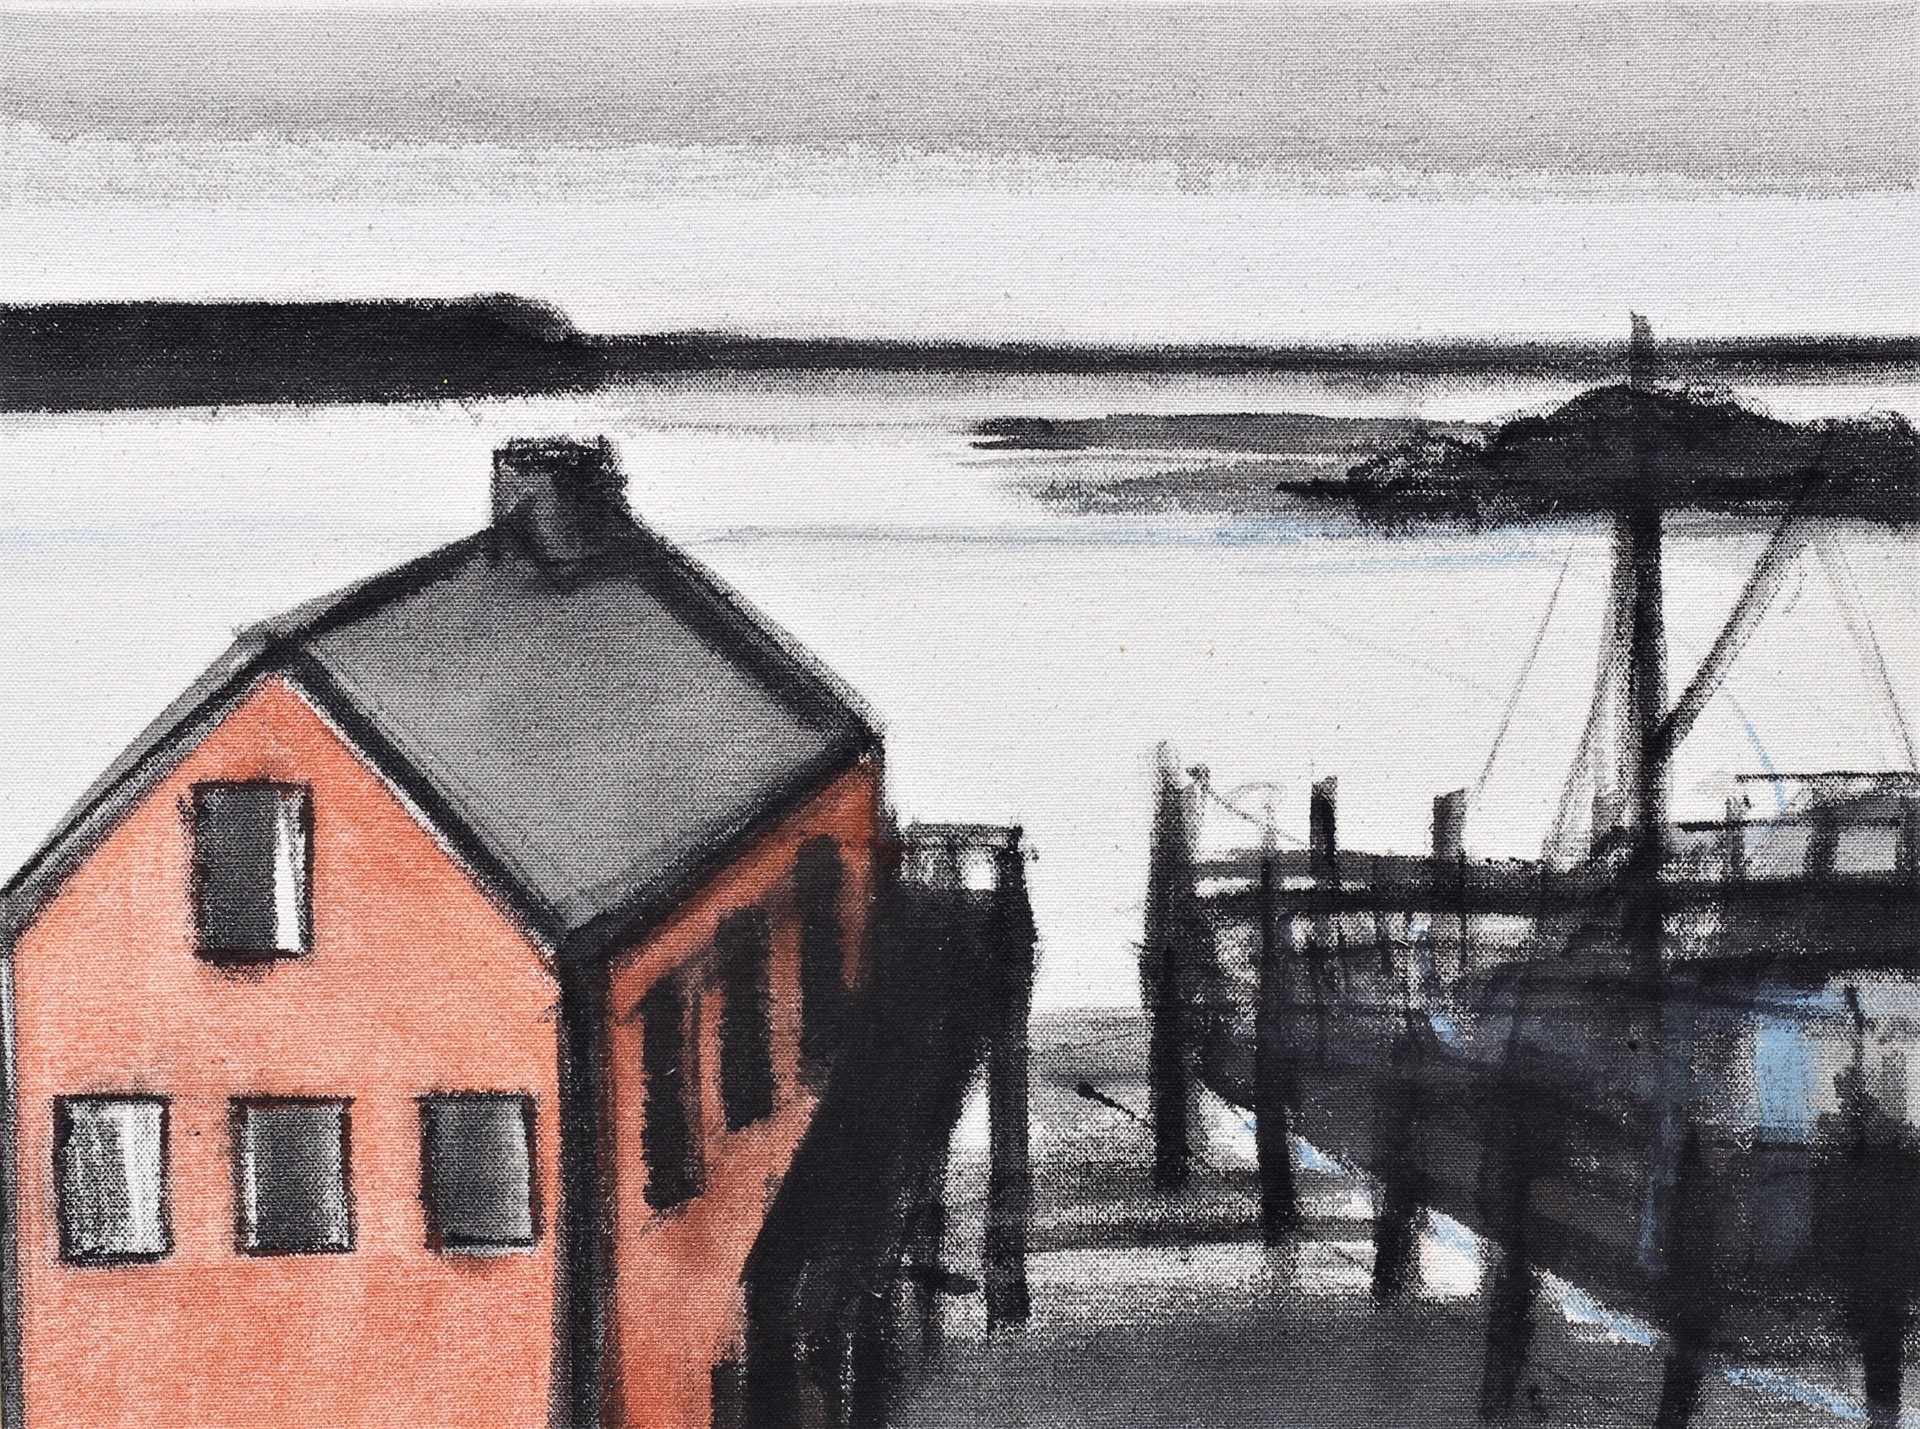 DOWN AT THE LOBSTER DOCK by CHRISTINA THWAITES (Landscape)